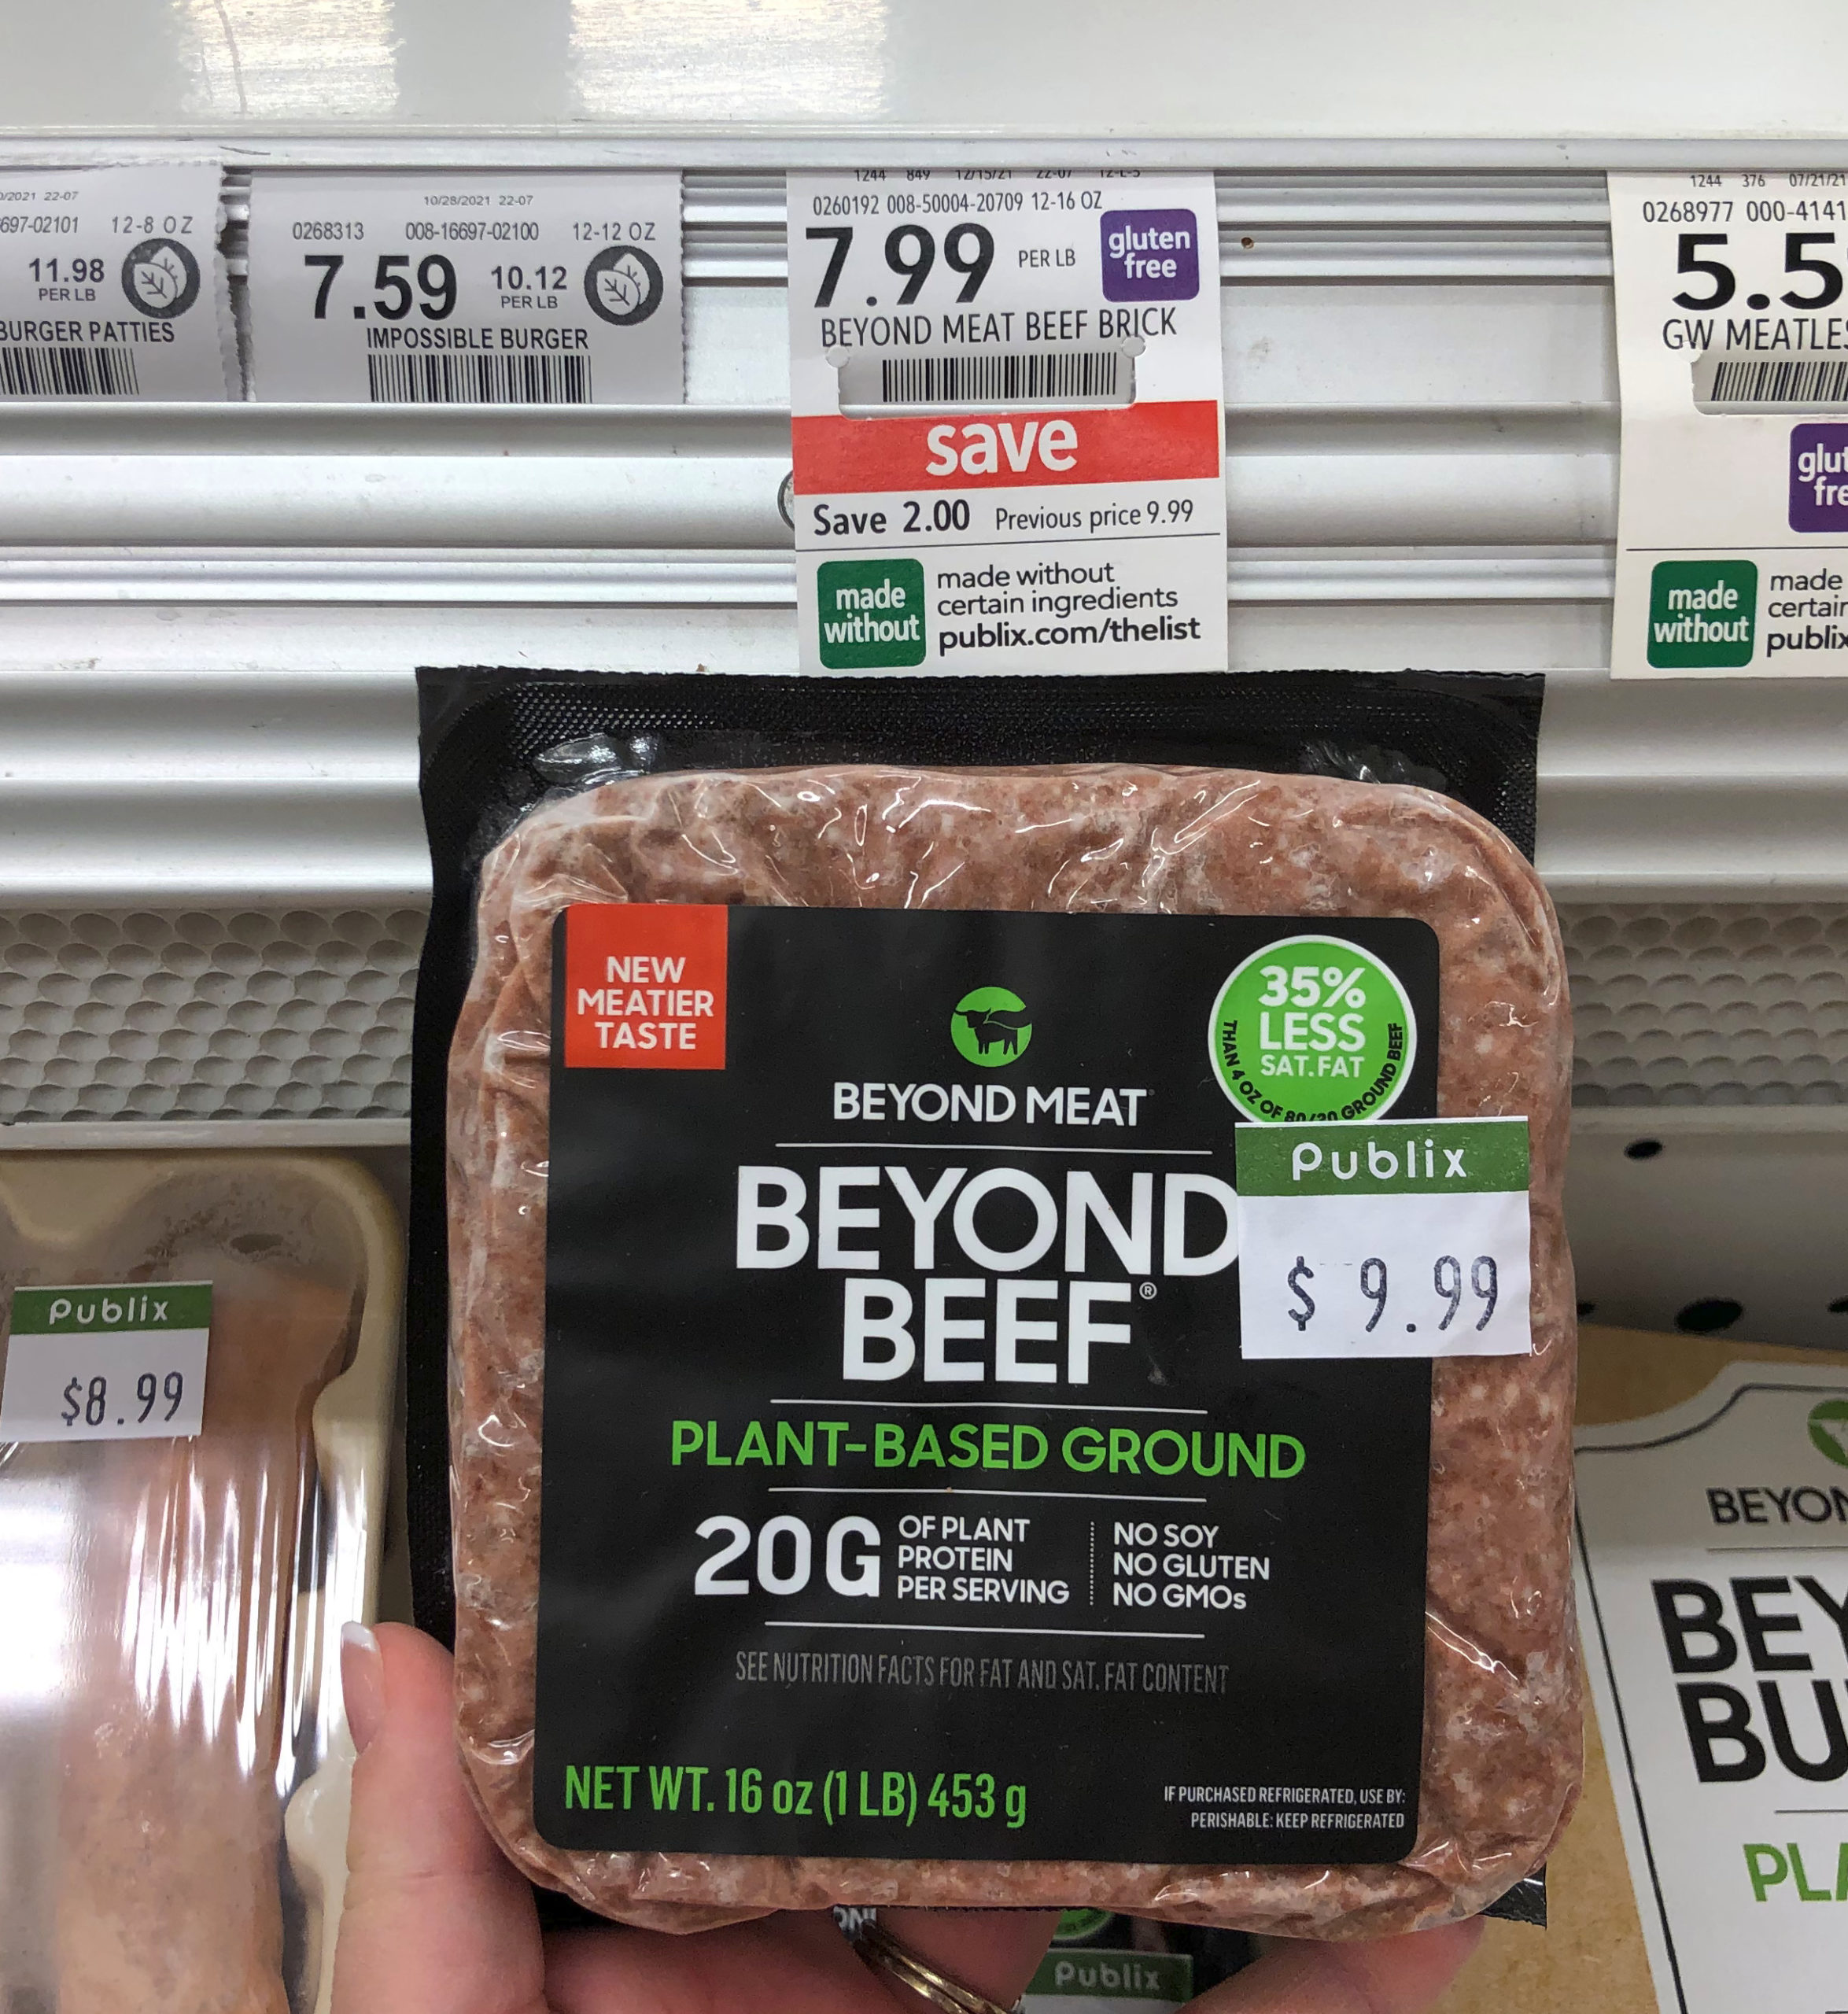 Beyond Meat Beyond Beef As Low As $4 At Publix on I Heart Publix 3